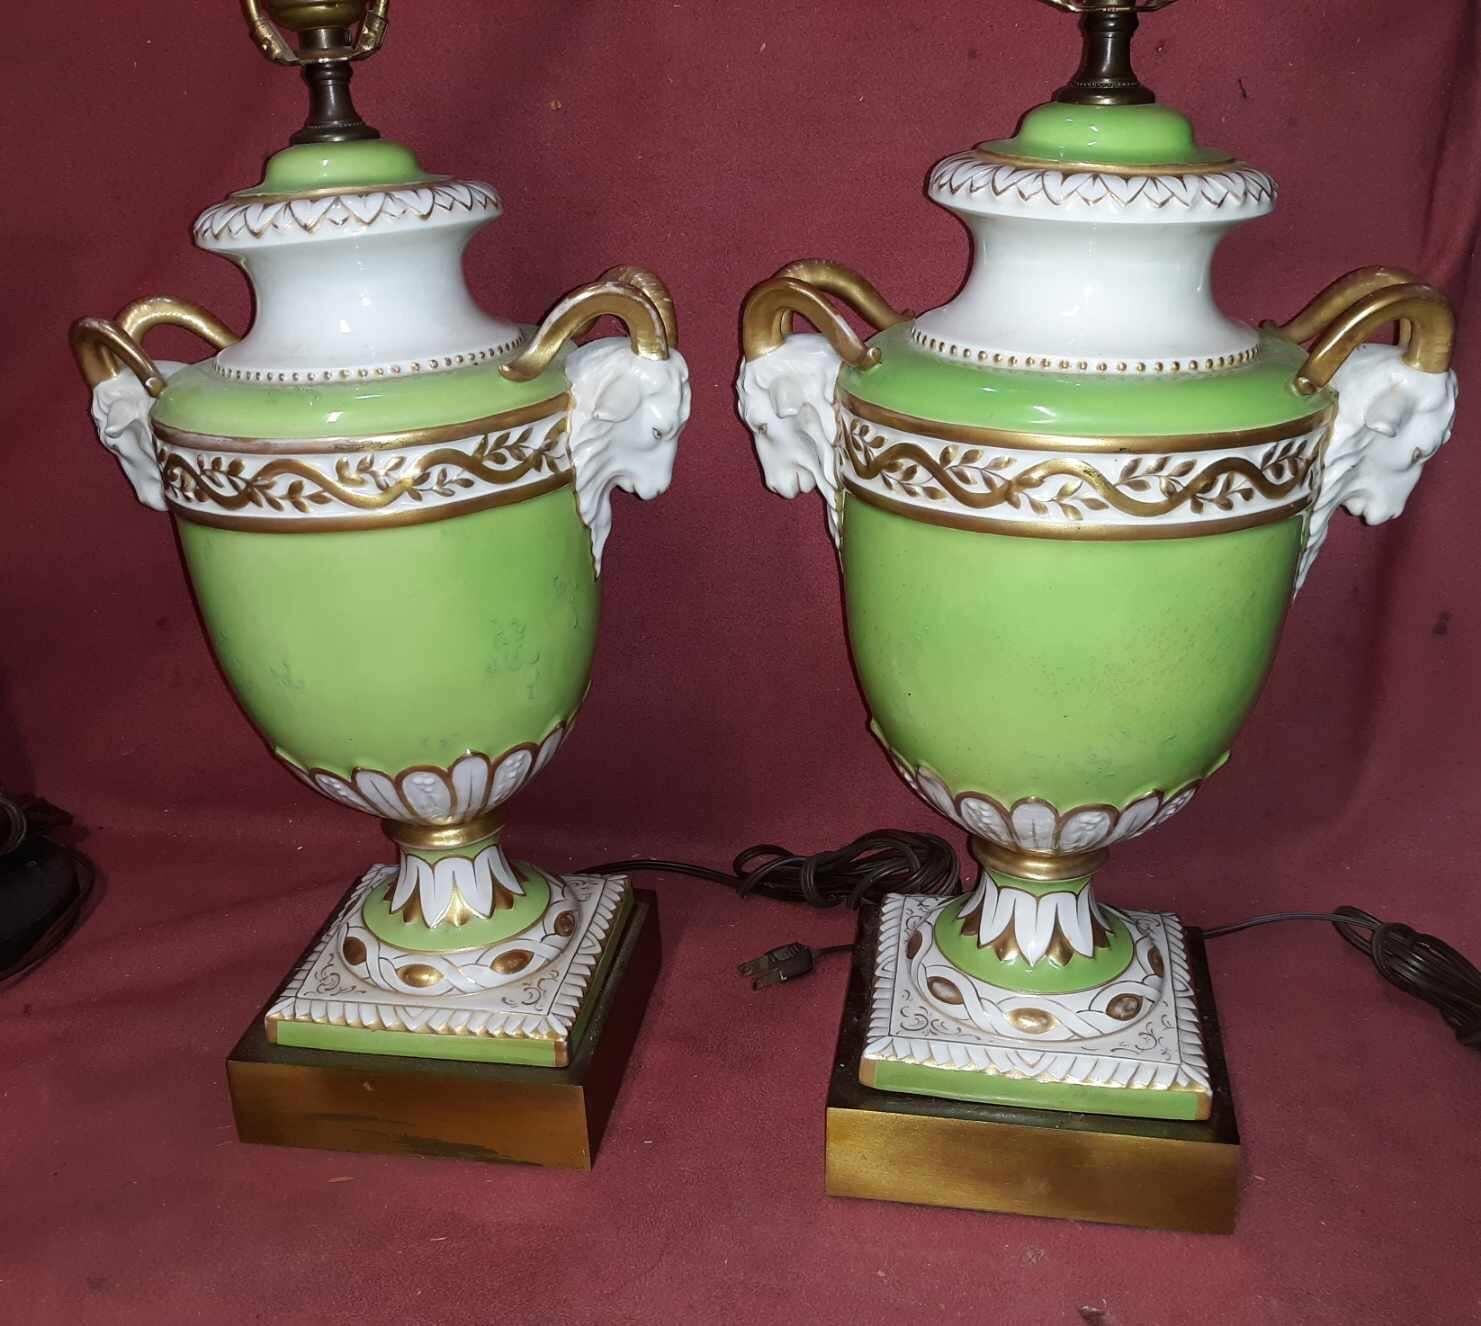 A pair of gilt porcelain rams head motif lamps in light Peridot green. The urn form with ram head handles on a square brass base.